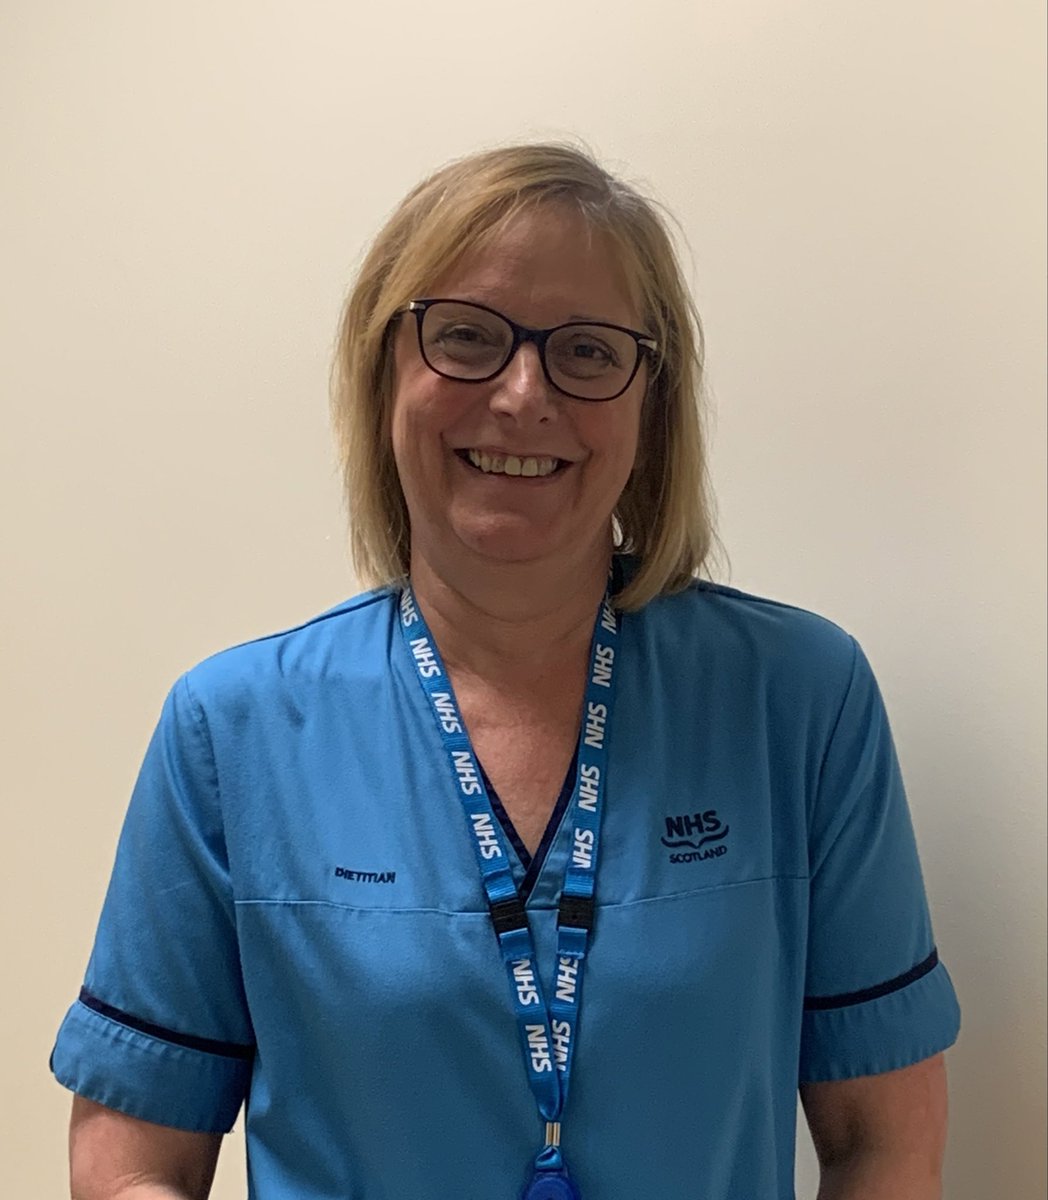 Happy Dietitians week - although retired from clinical practice it is a privilege to support our members through working with the Scotland Board. I wore this tunic with pride and it was a privilege to support our patients to live well. #DW2023 @BDA_Scotland @BDA_Dietitians